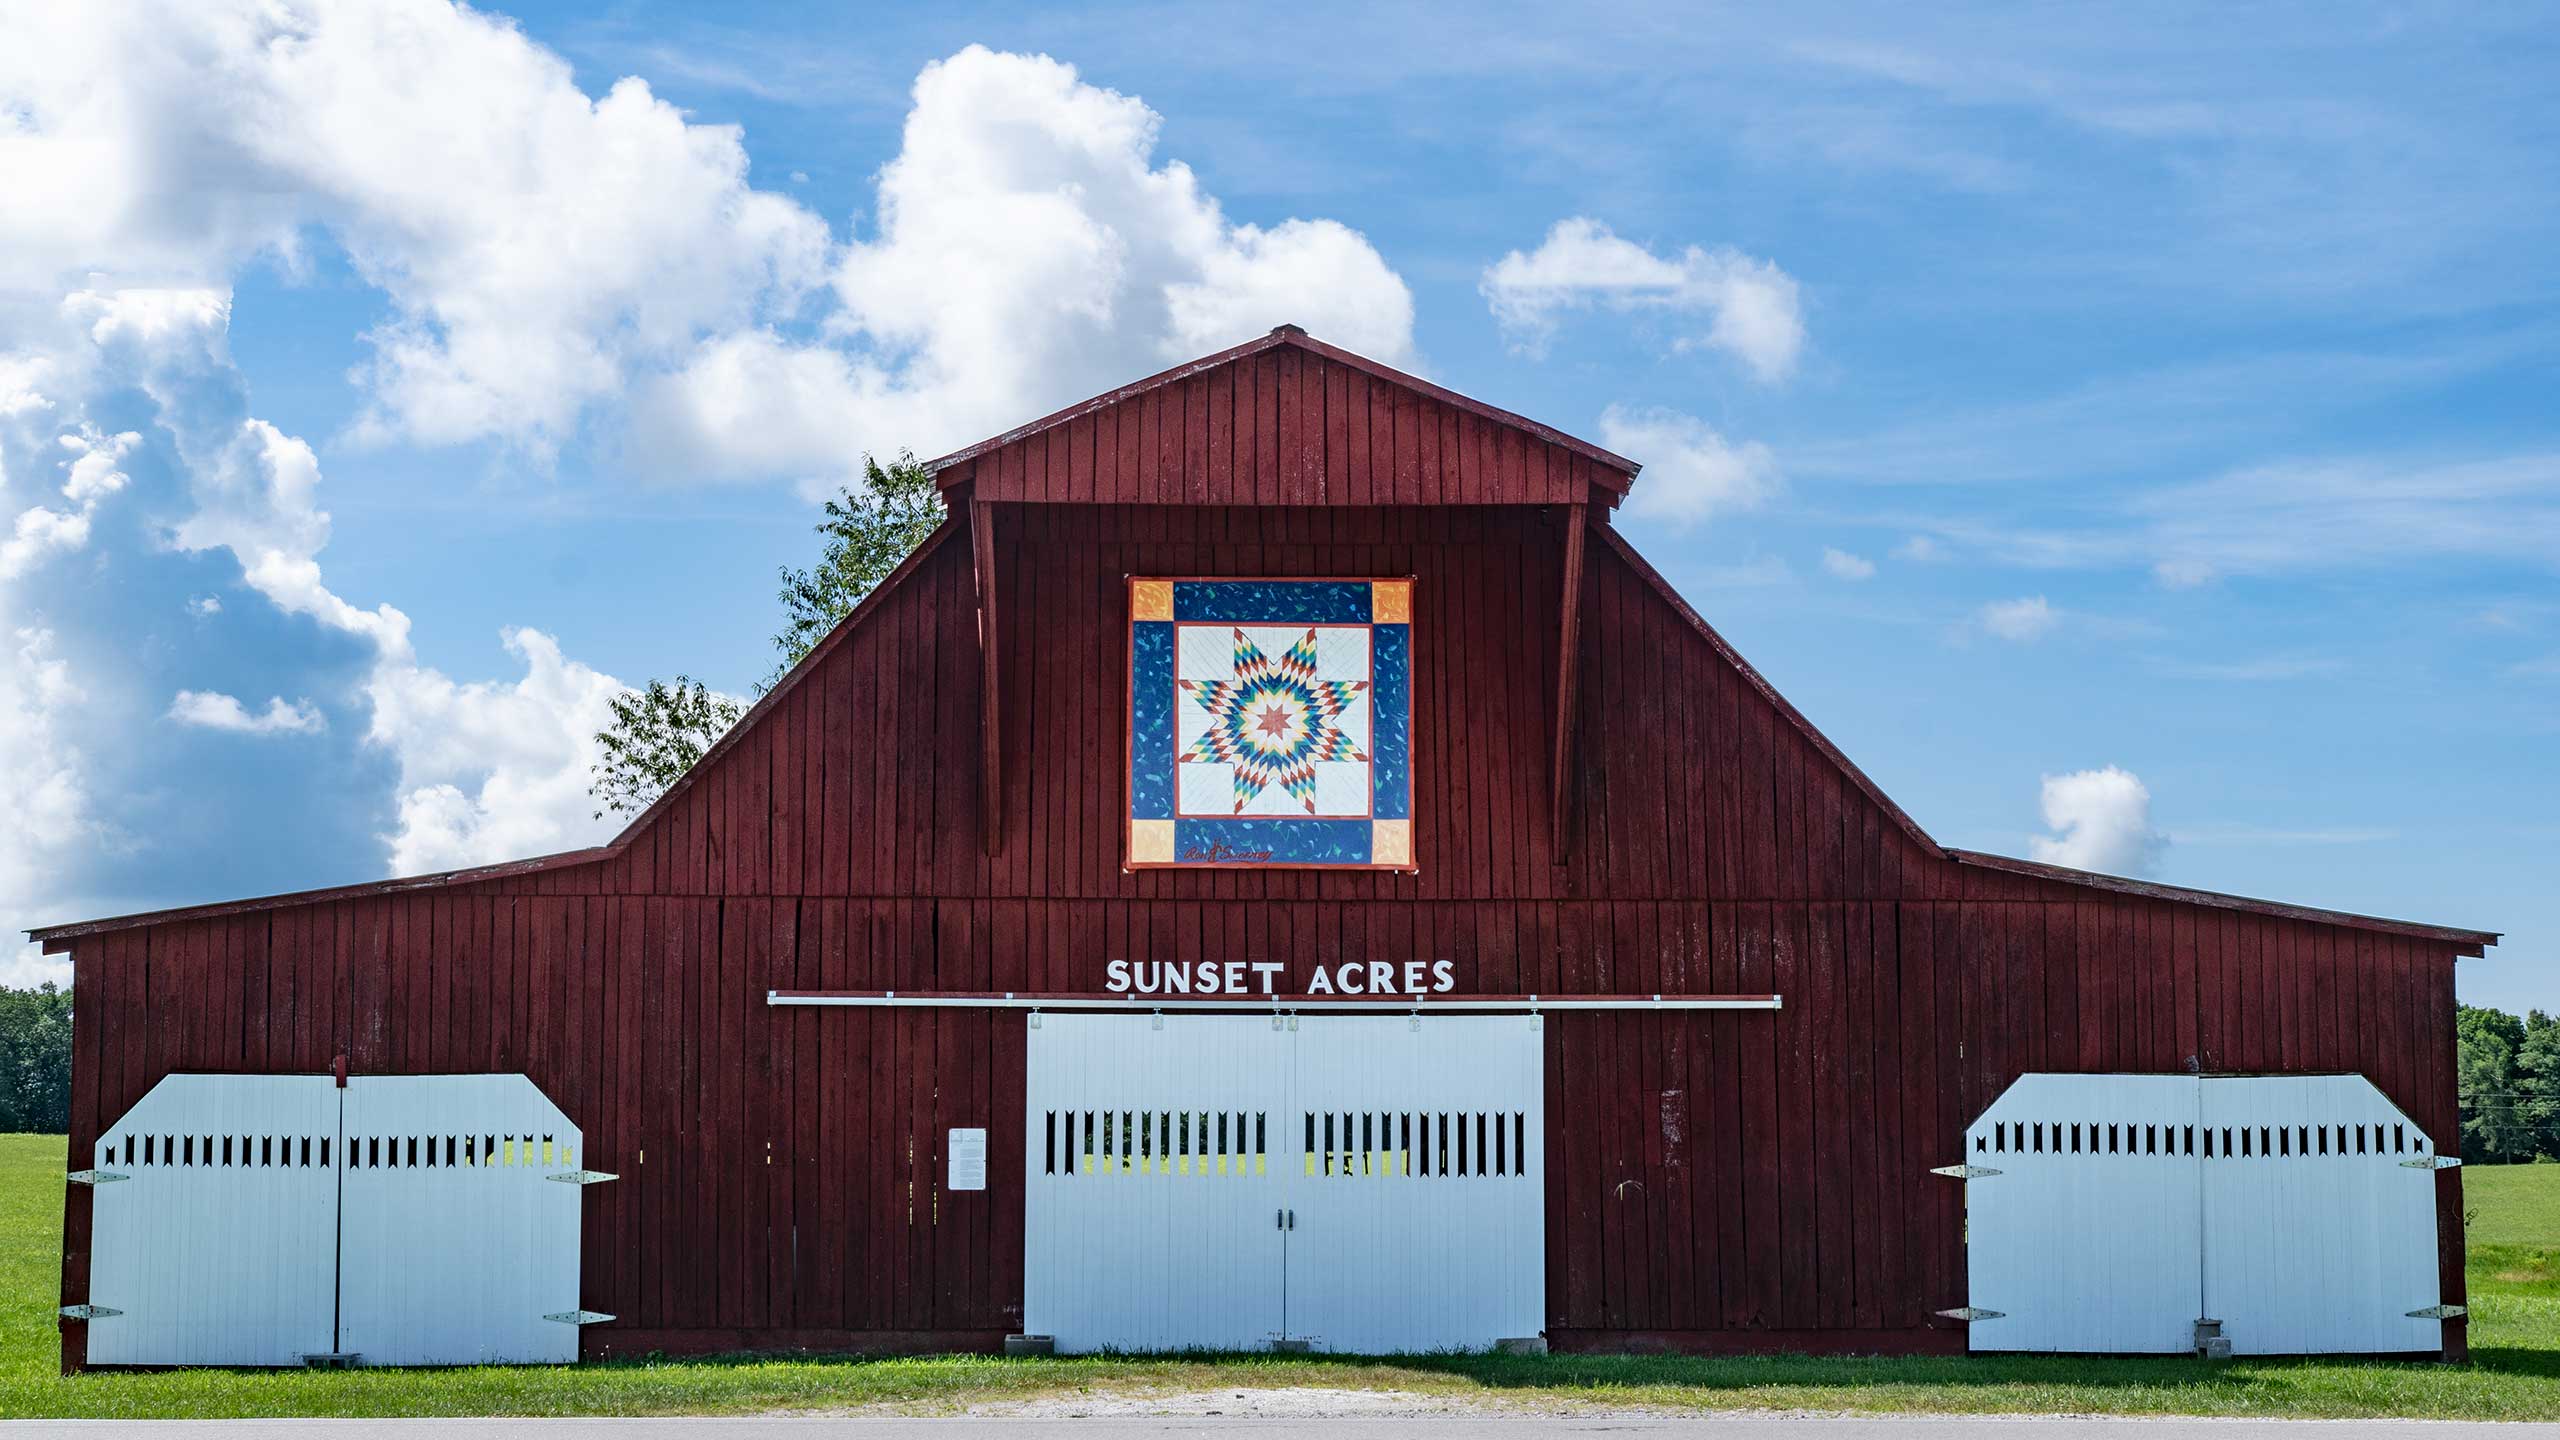 Sunset Acres barn with quilt pattern